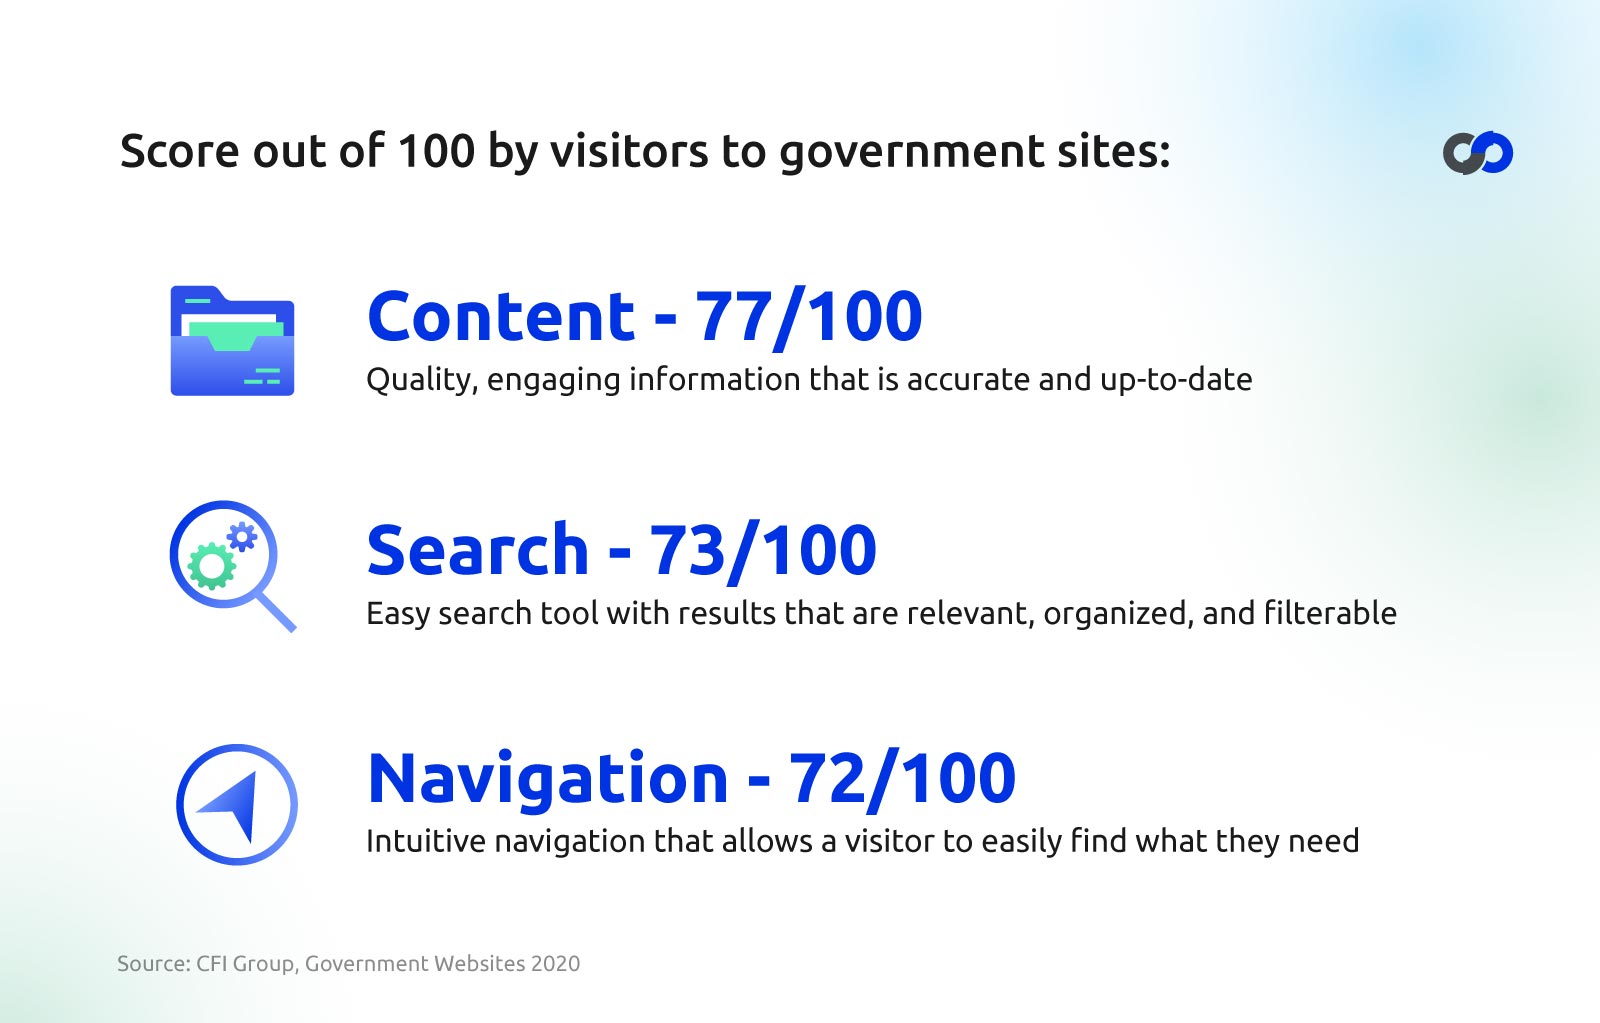 score out of 100 visitors to government sites